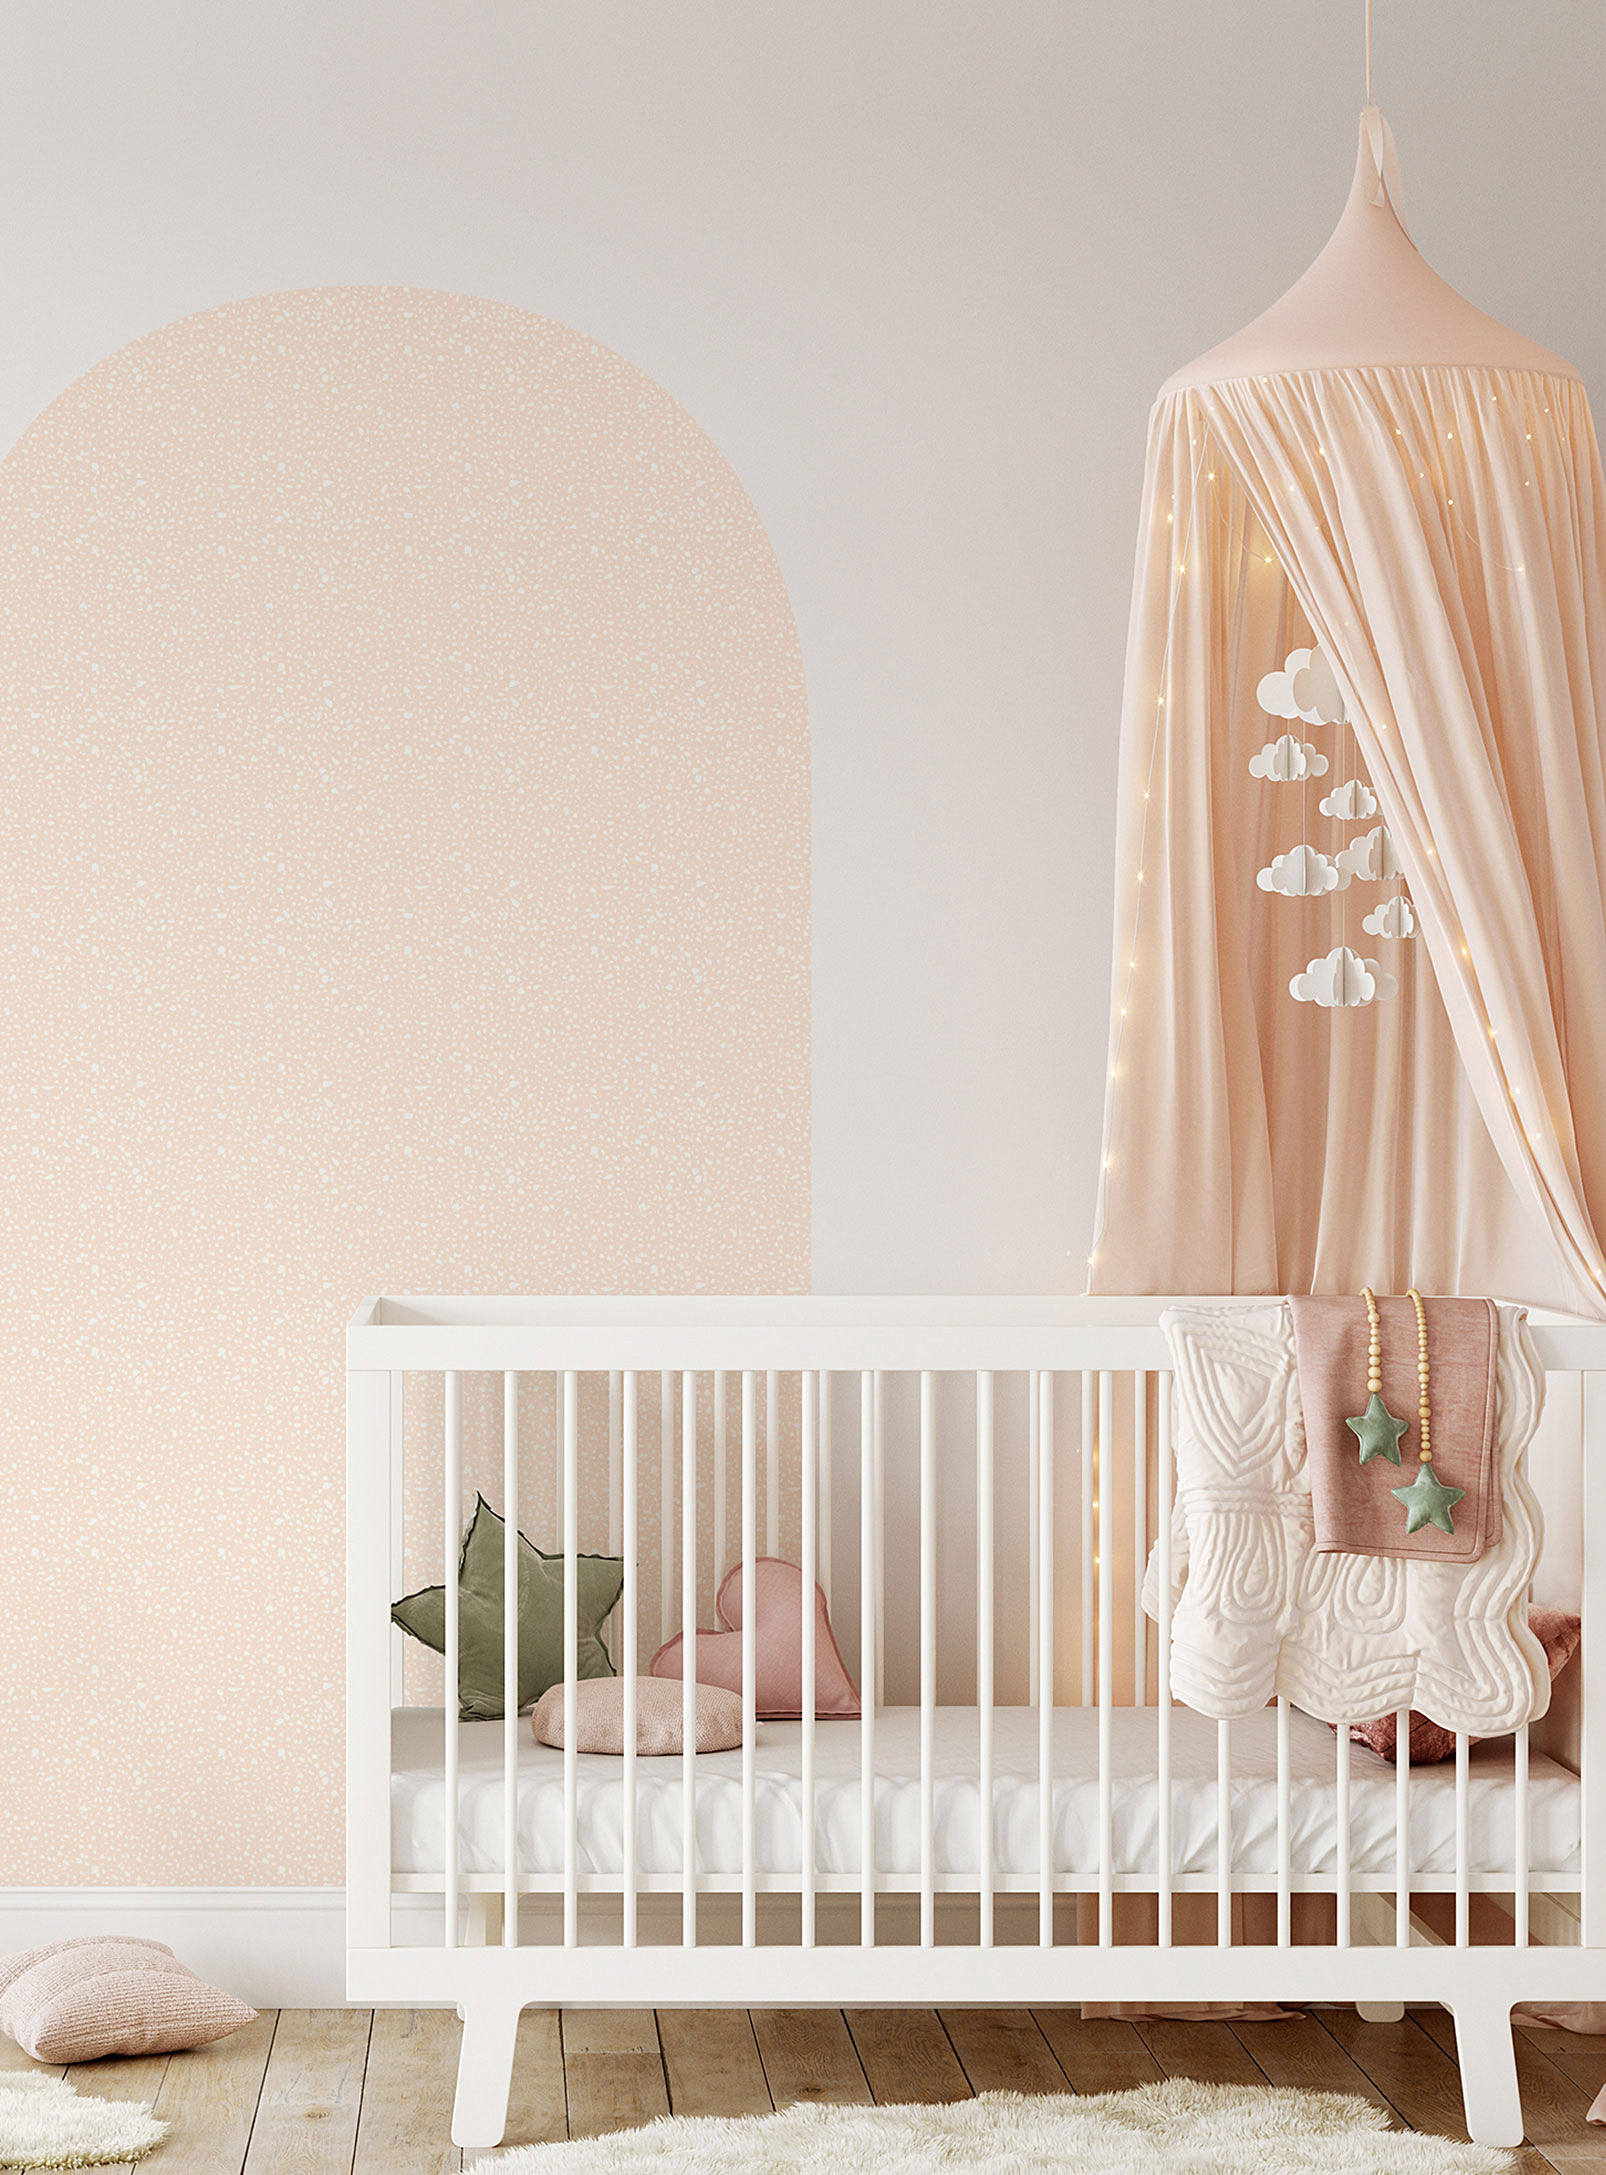 Meraki L'arche De Noé Wall Decal In Collaboration With Artist Marie-france Auger In Pink